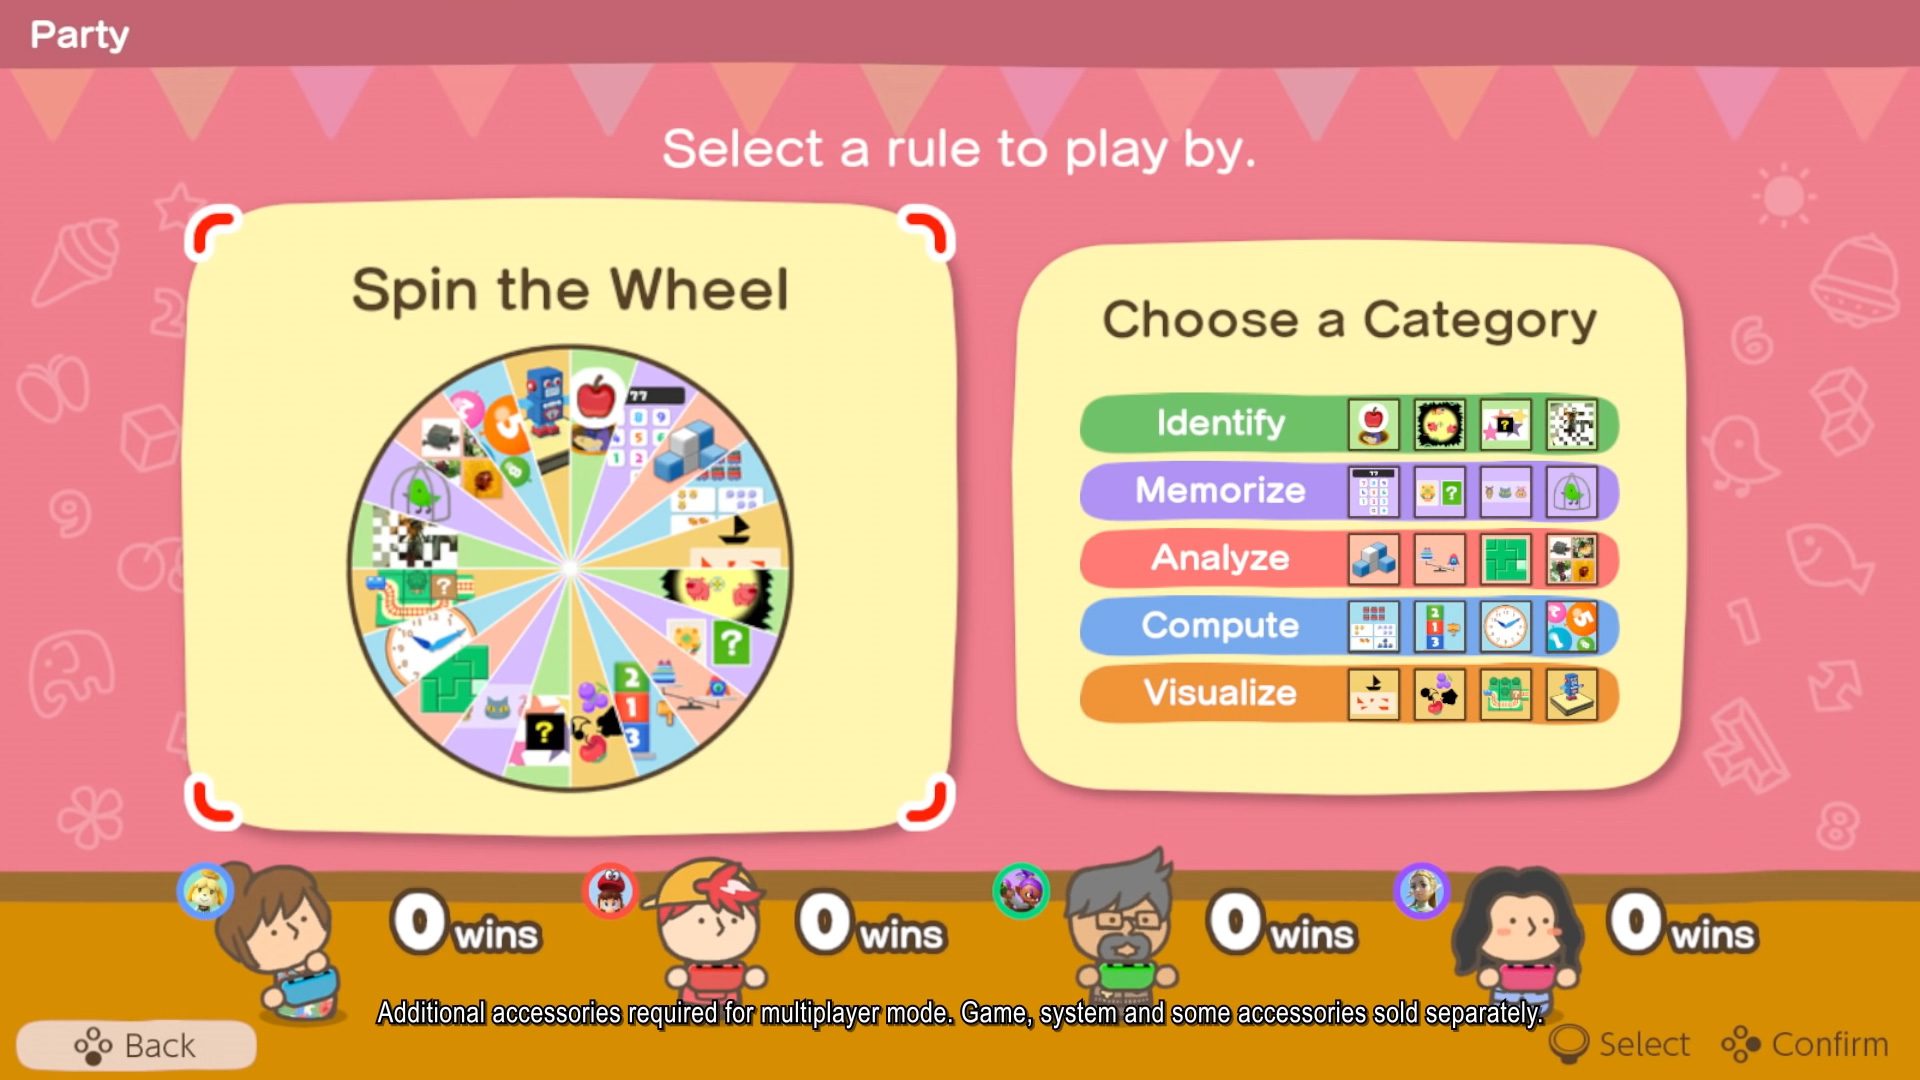 Big Brain Academy: Brain vs. Brain local multiplayer lets you spin the wheel or choose a category